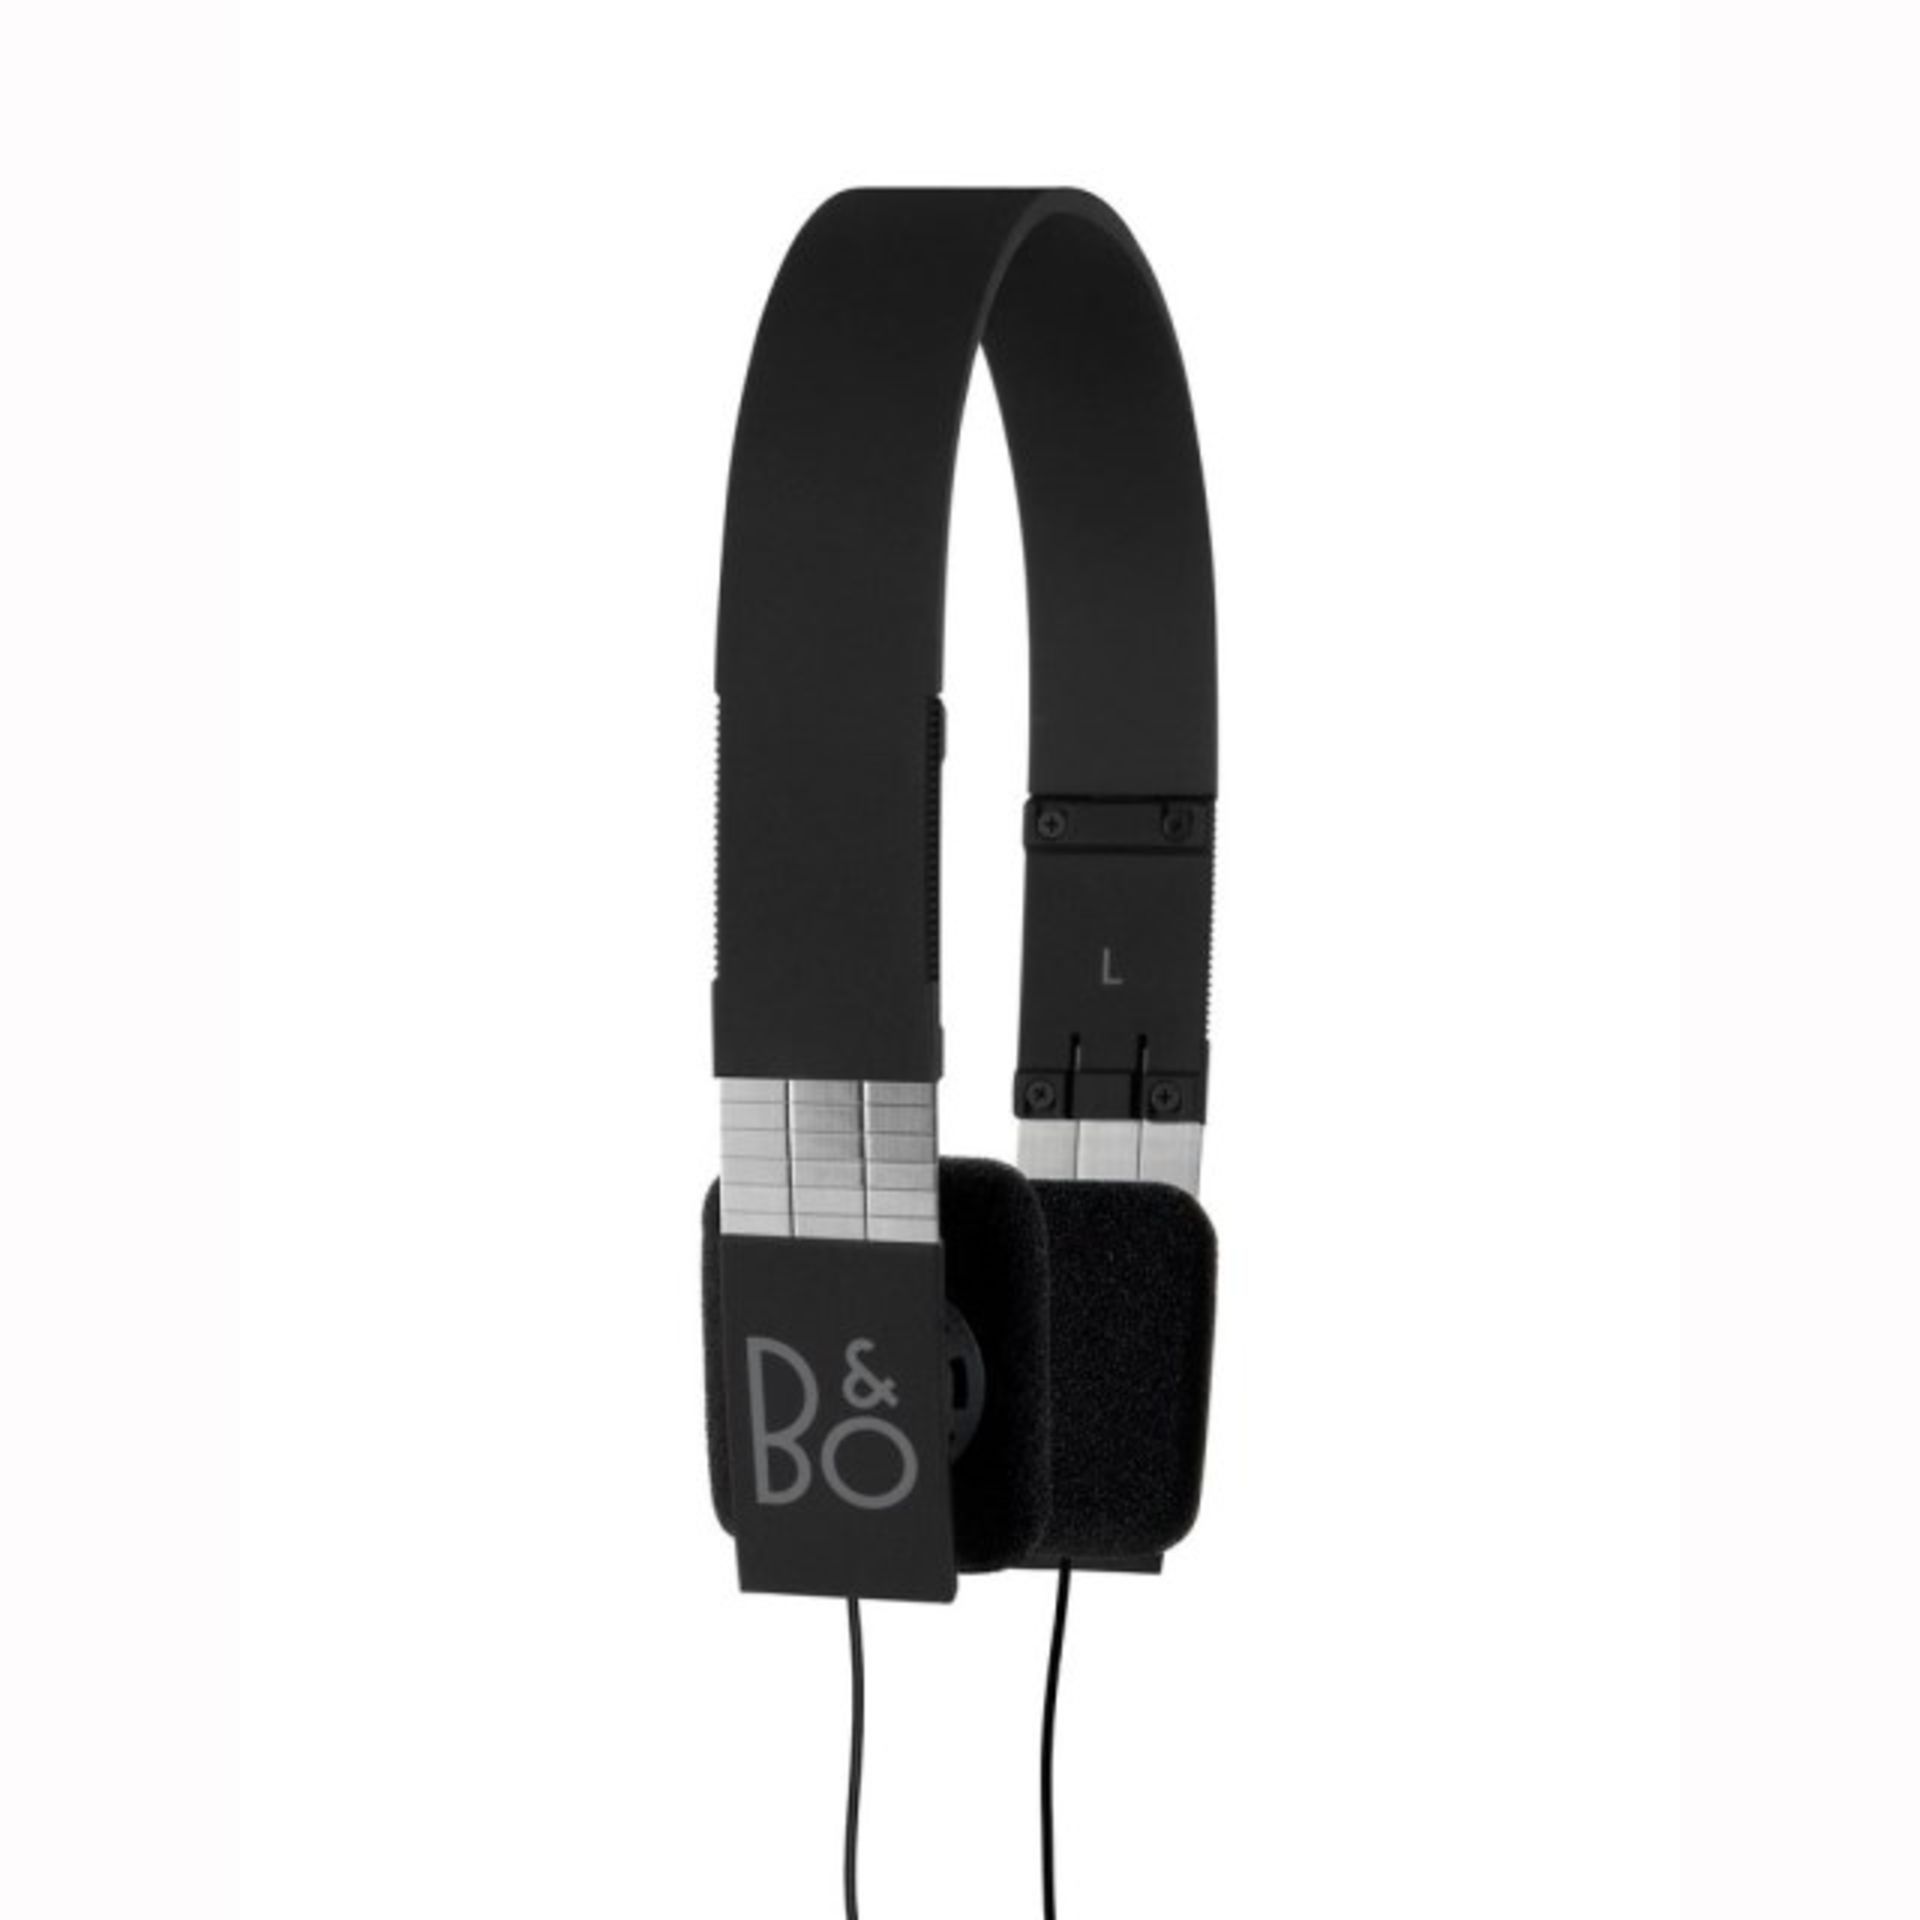 V *TRADE QTY* Brand New Bang & Olufsen Form 2i Headphones With Inline Remote/Microphone - Ultra